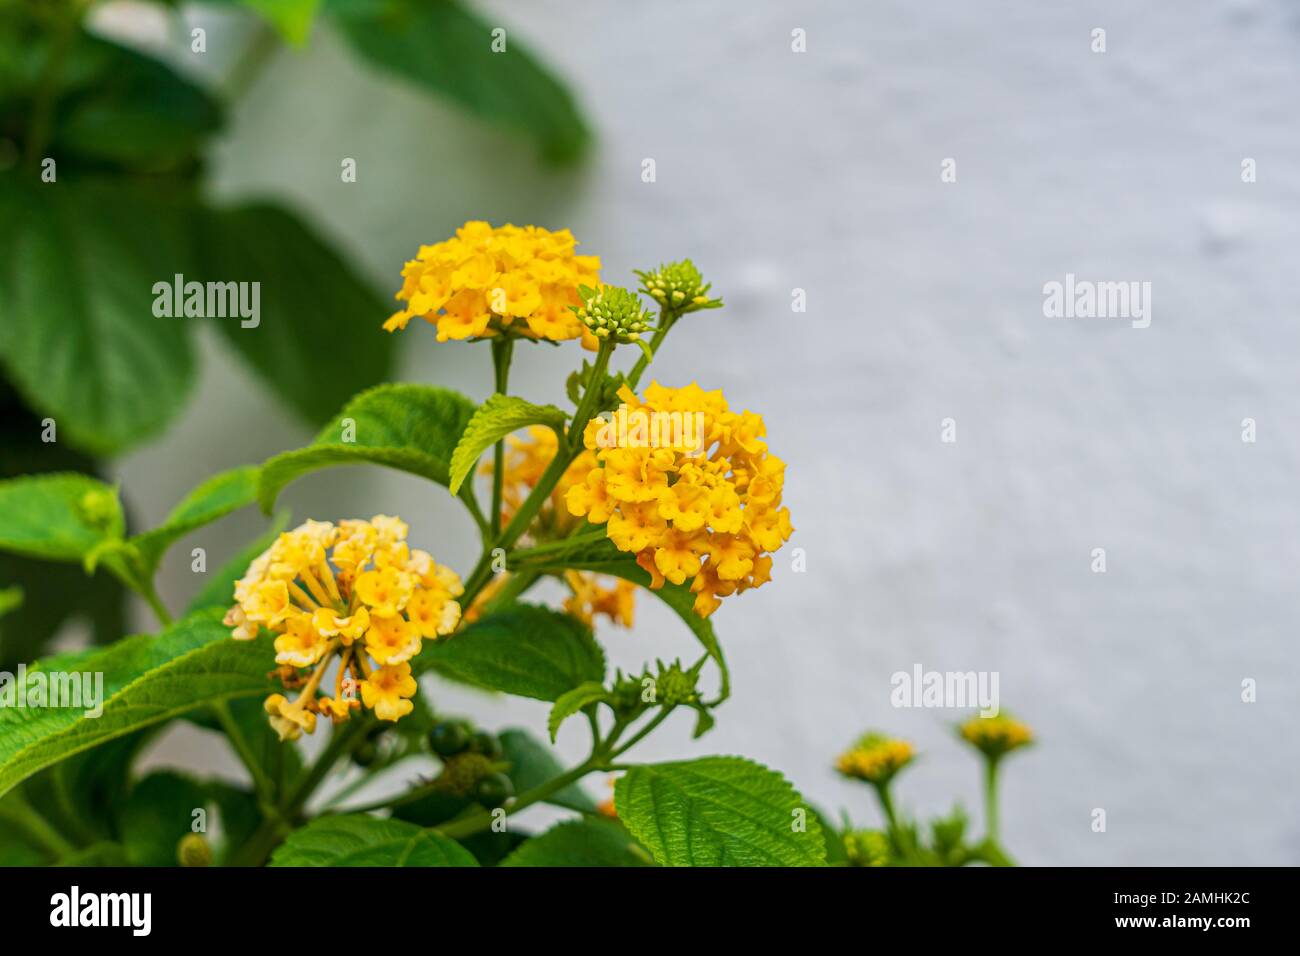 Yellow Lantana Camara Splendens flowering against green foliage and white washed building in background, Spain Stock Photo